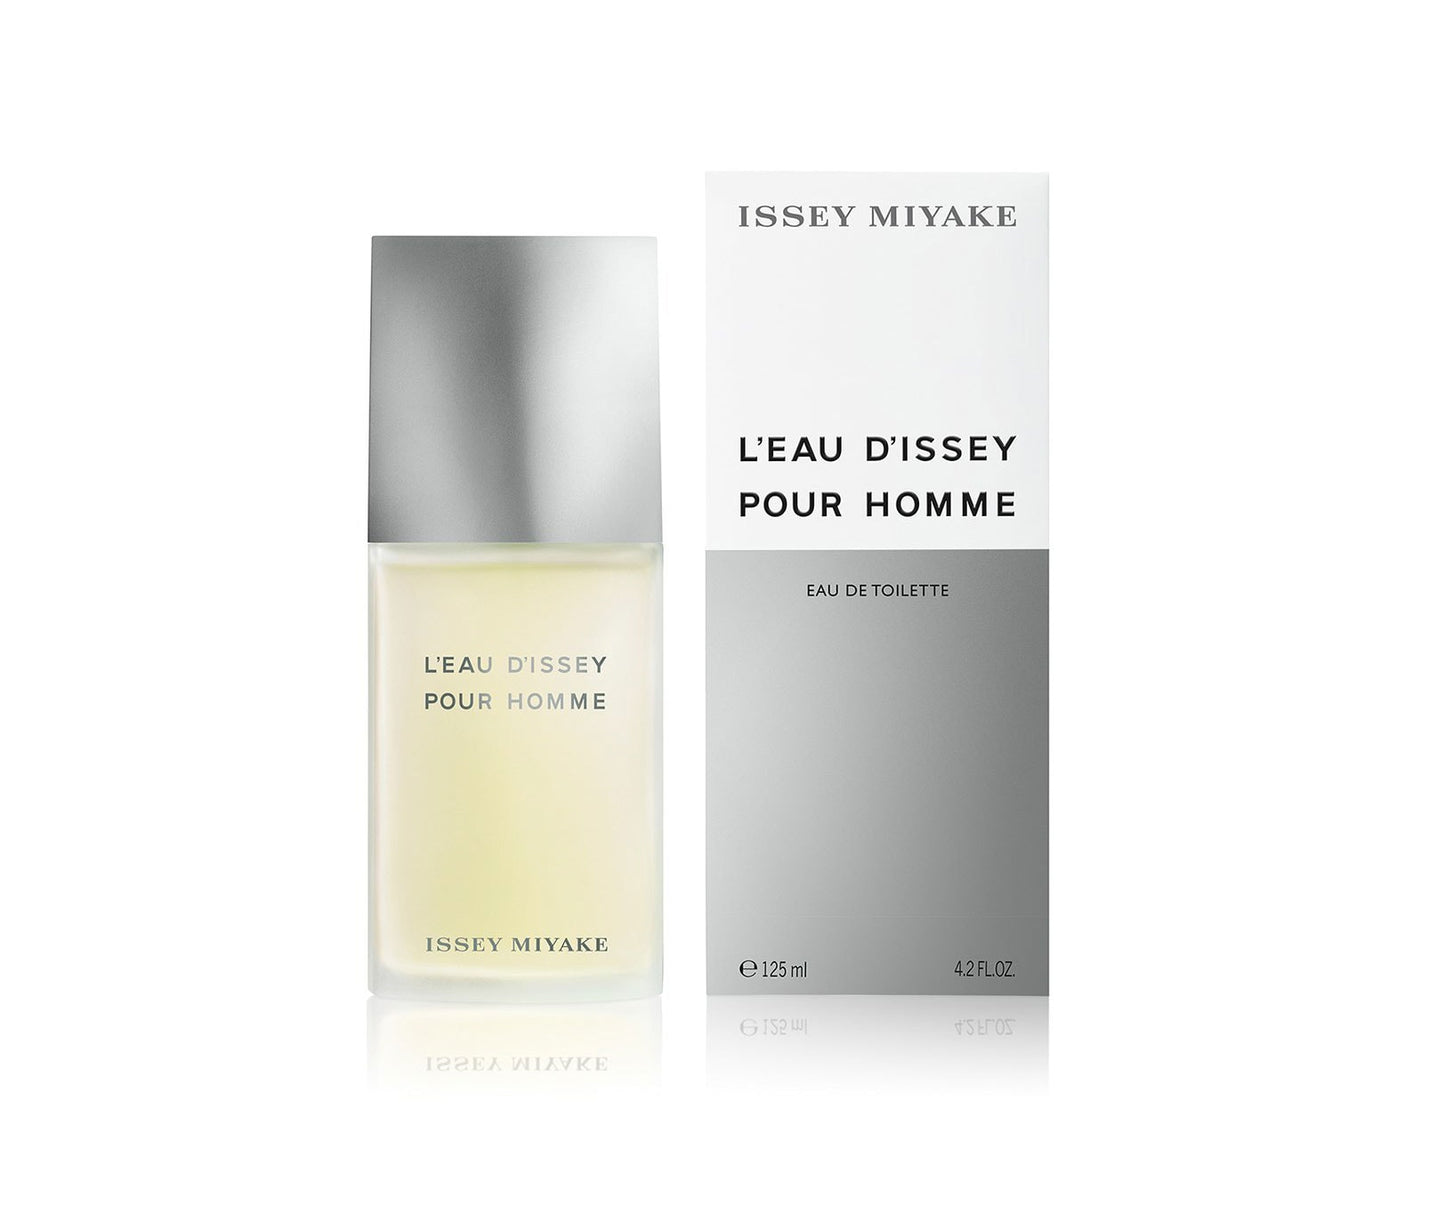 ISSEY MIYAKE POUR HOMME